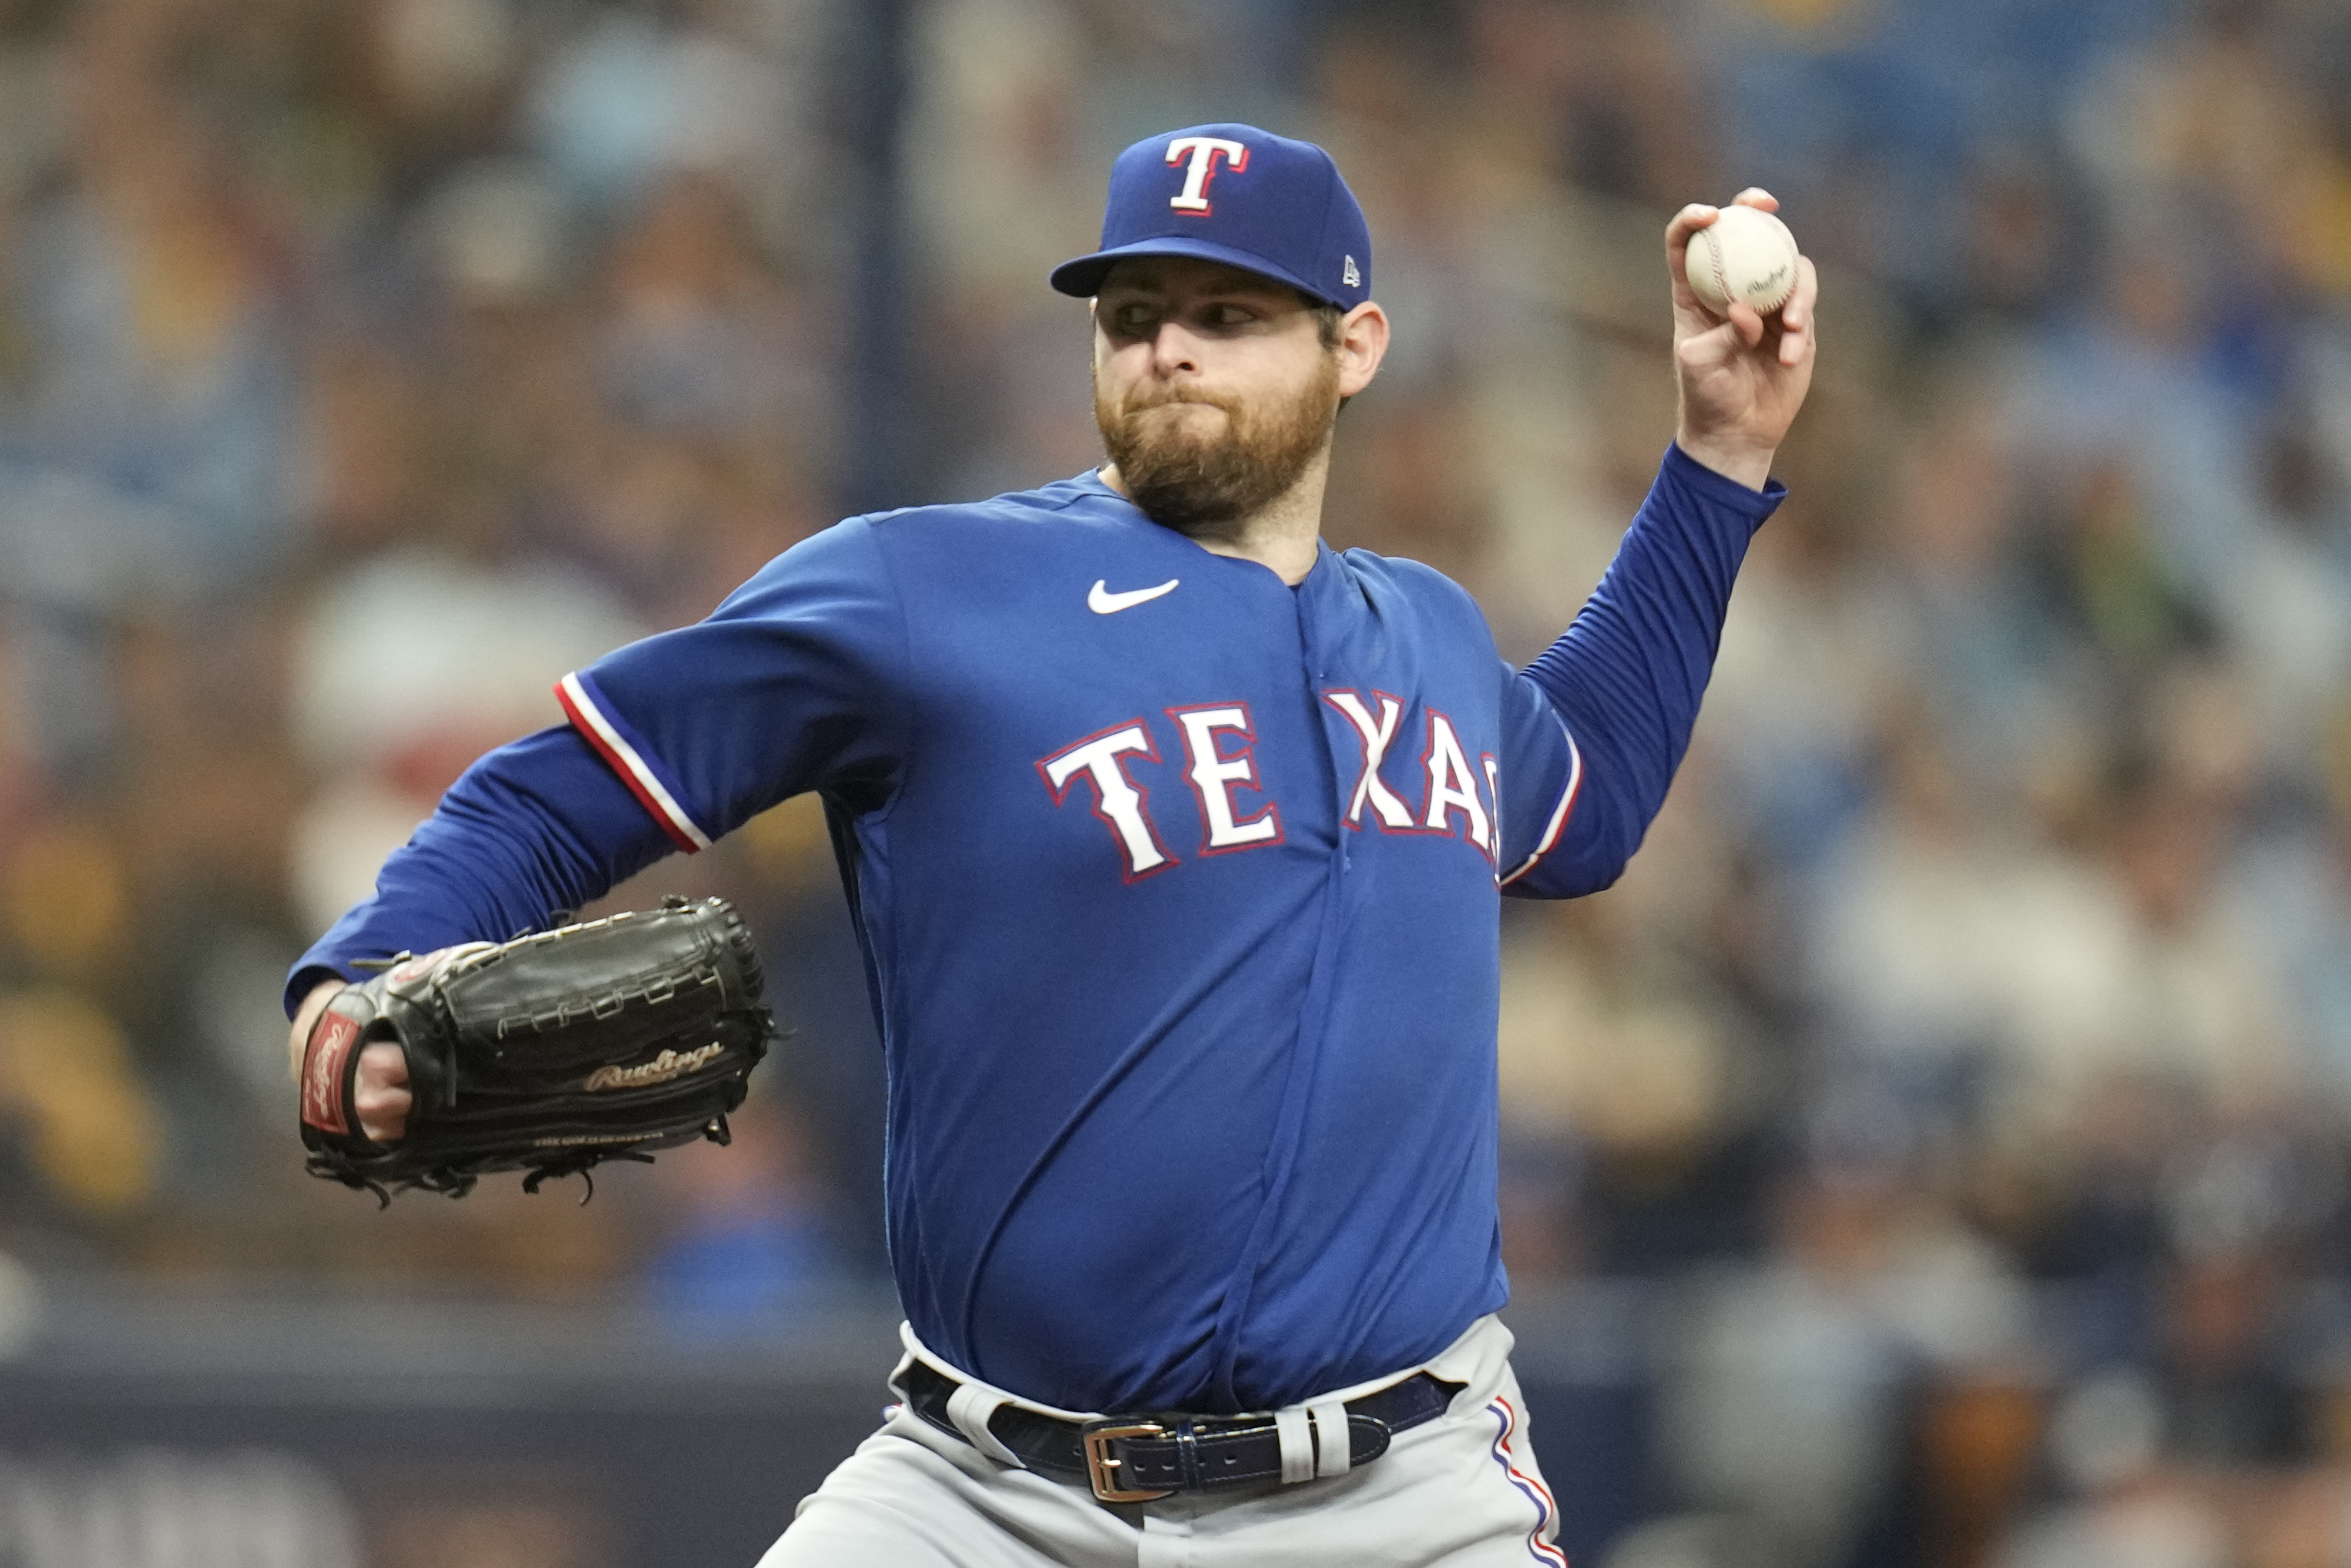 Montgomery Jabs At Yankees With Dominant Outing For Rangers